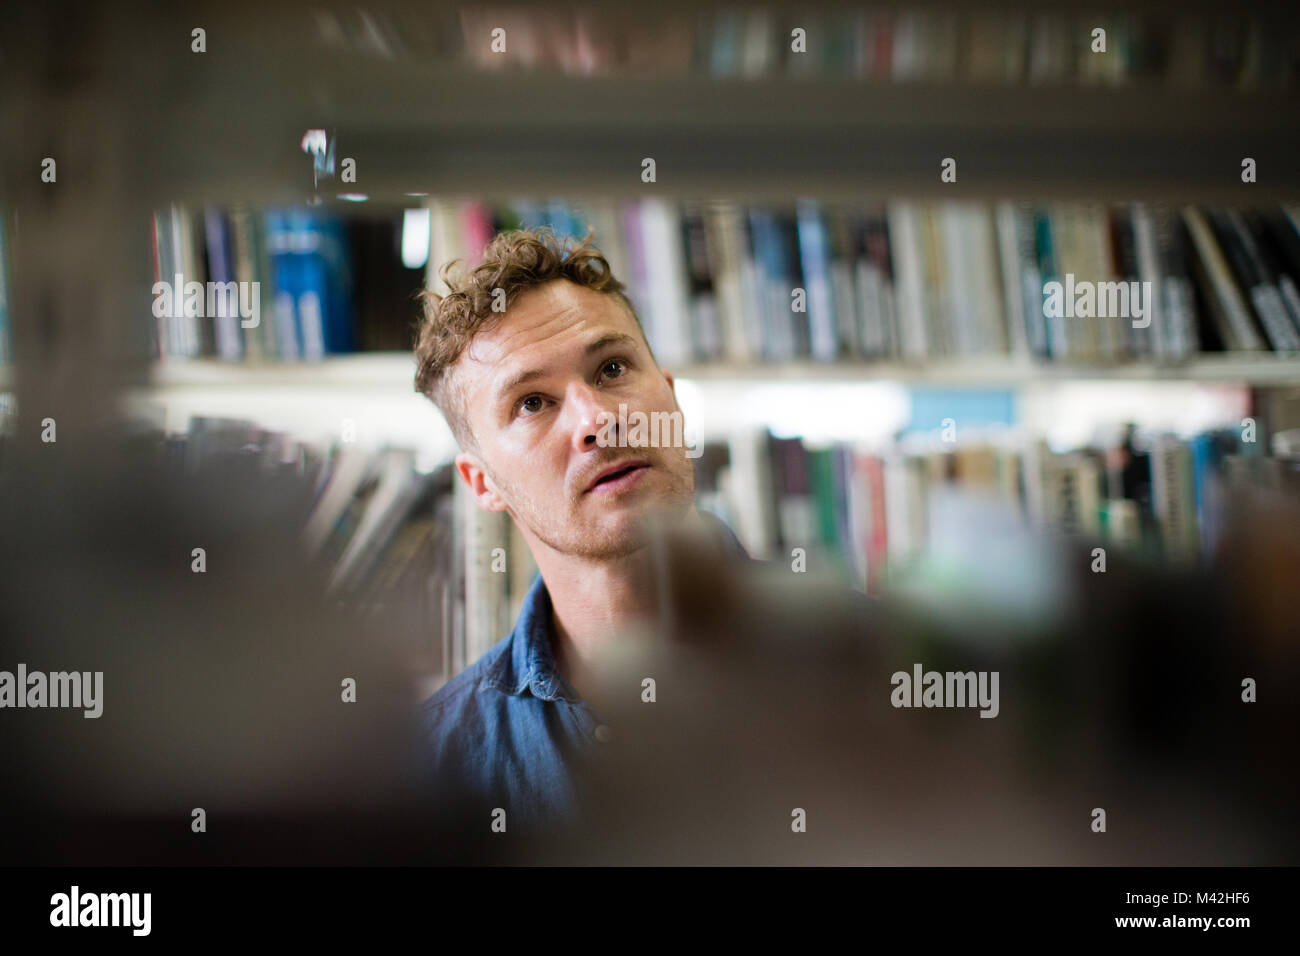 Adult student in library Stock Photo